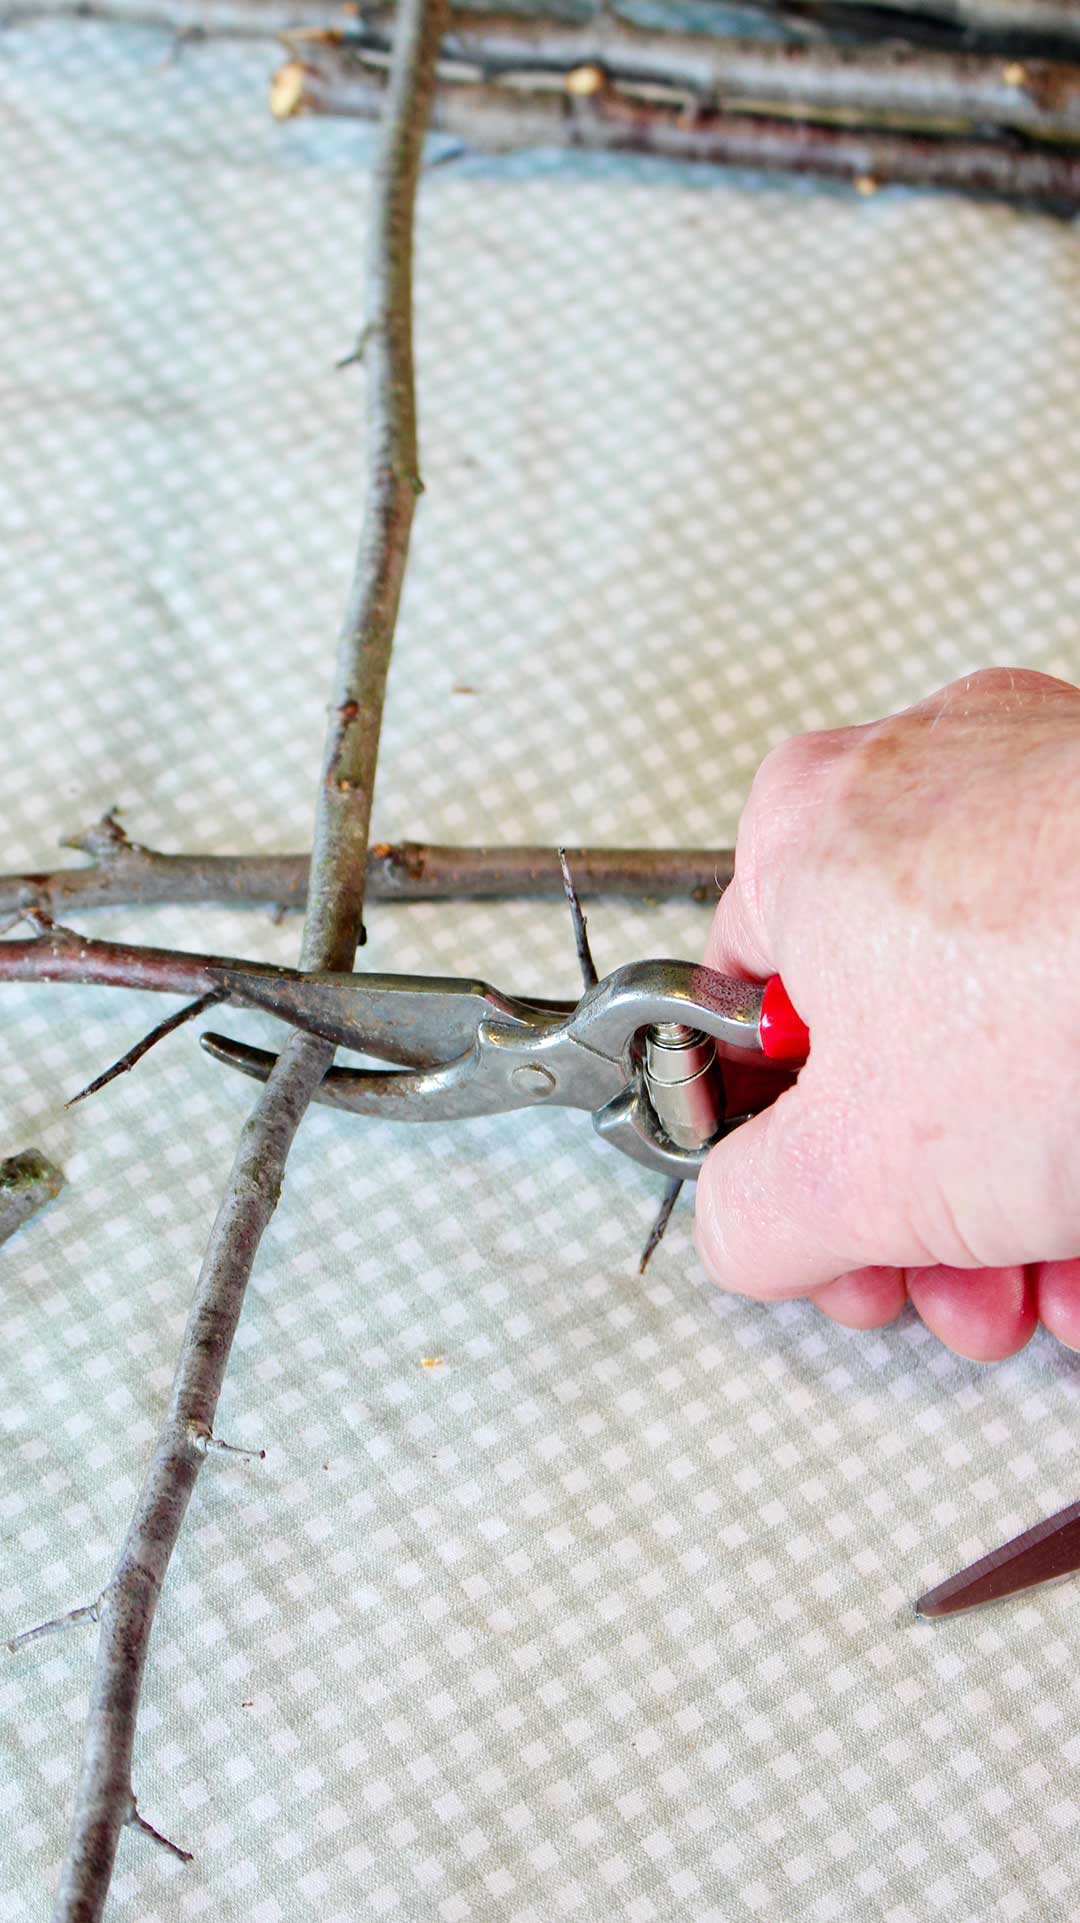 Hand clipping twigs to desired size.